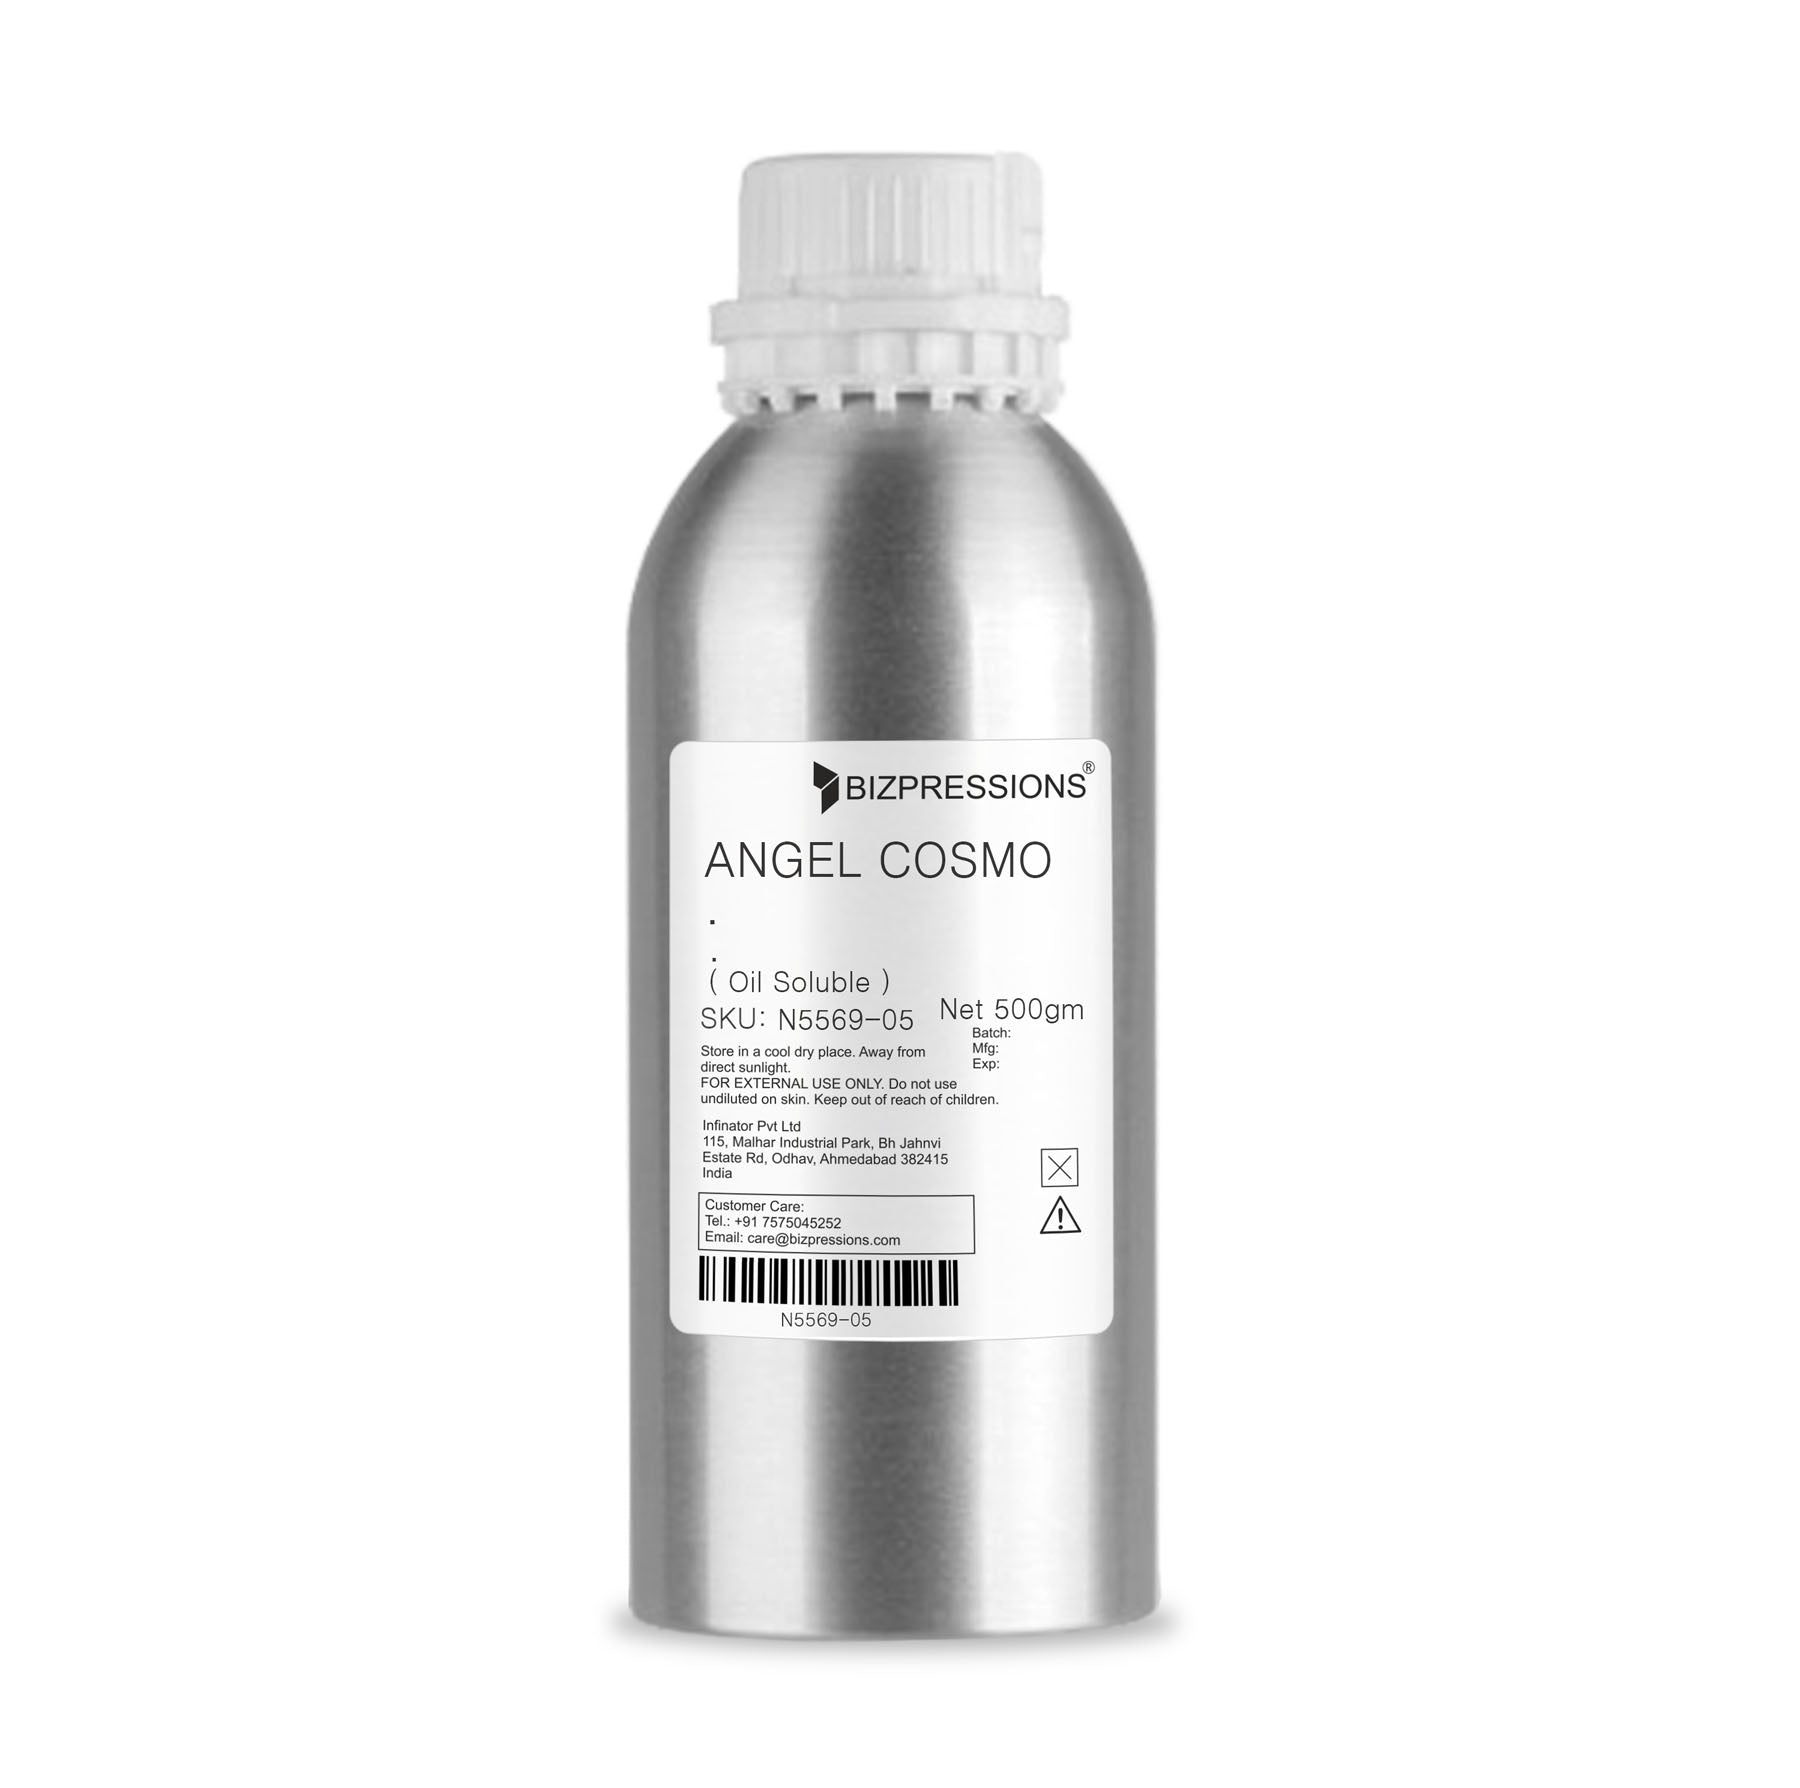 ANGEL COSMO - Fragrance ( Oil Soluble ) - 500 gm